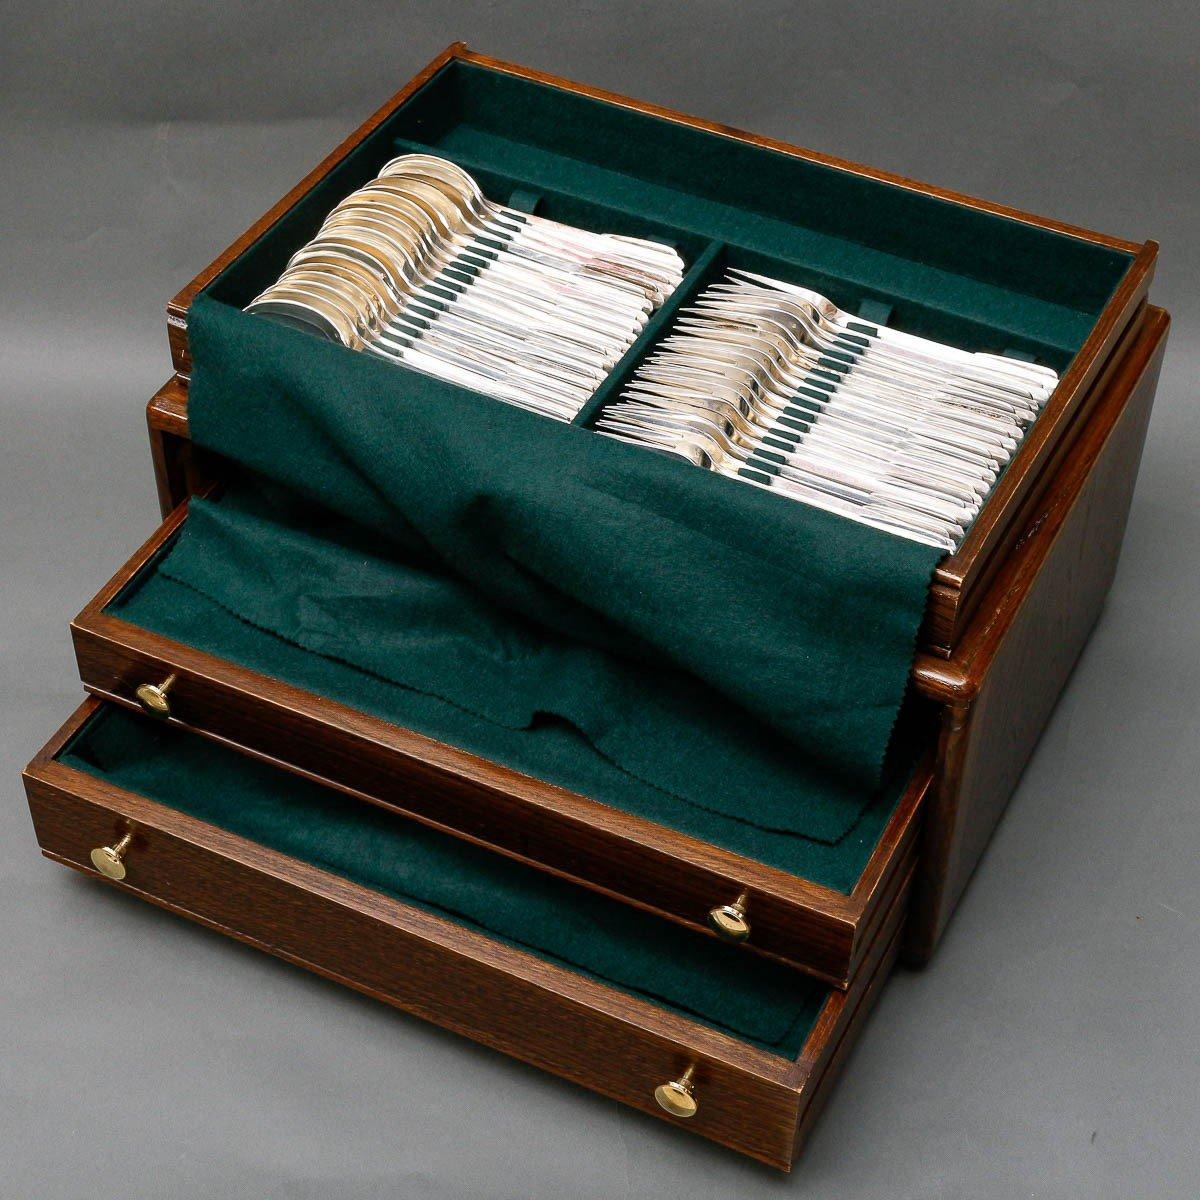 Solid silver cutlery in its wooden chest made up of three drawers.
Very rare model designed by Designer Fjerdinstad.
Dimensions of the chest: 51 cm x 37 cm x 23.5 cm
Weight: 7268 grams
Material: Silver 1st title
Minerva hallmark
Period: ART